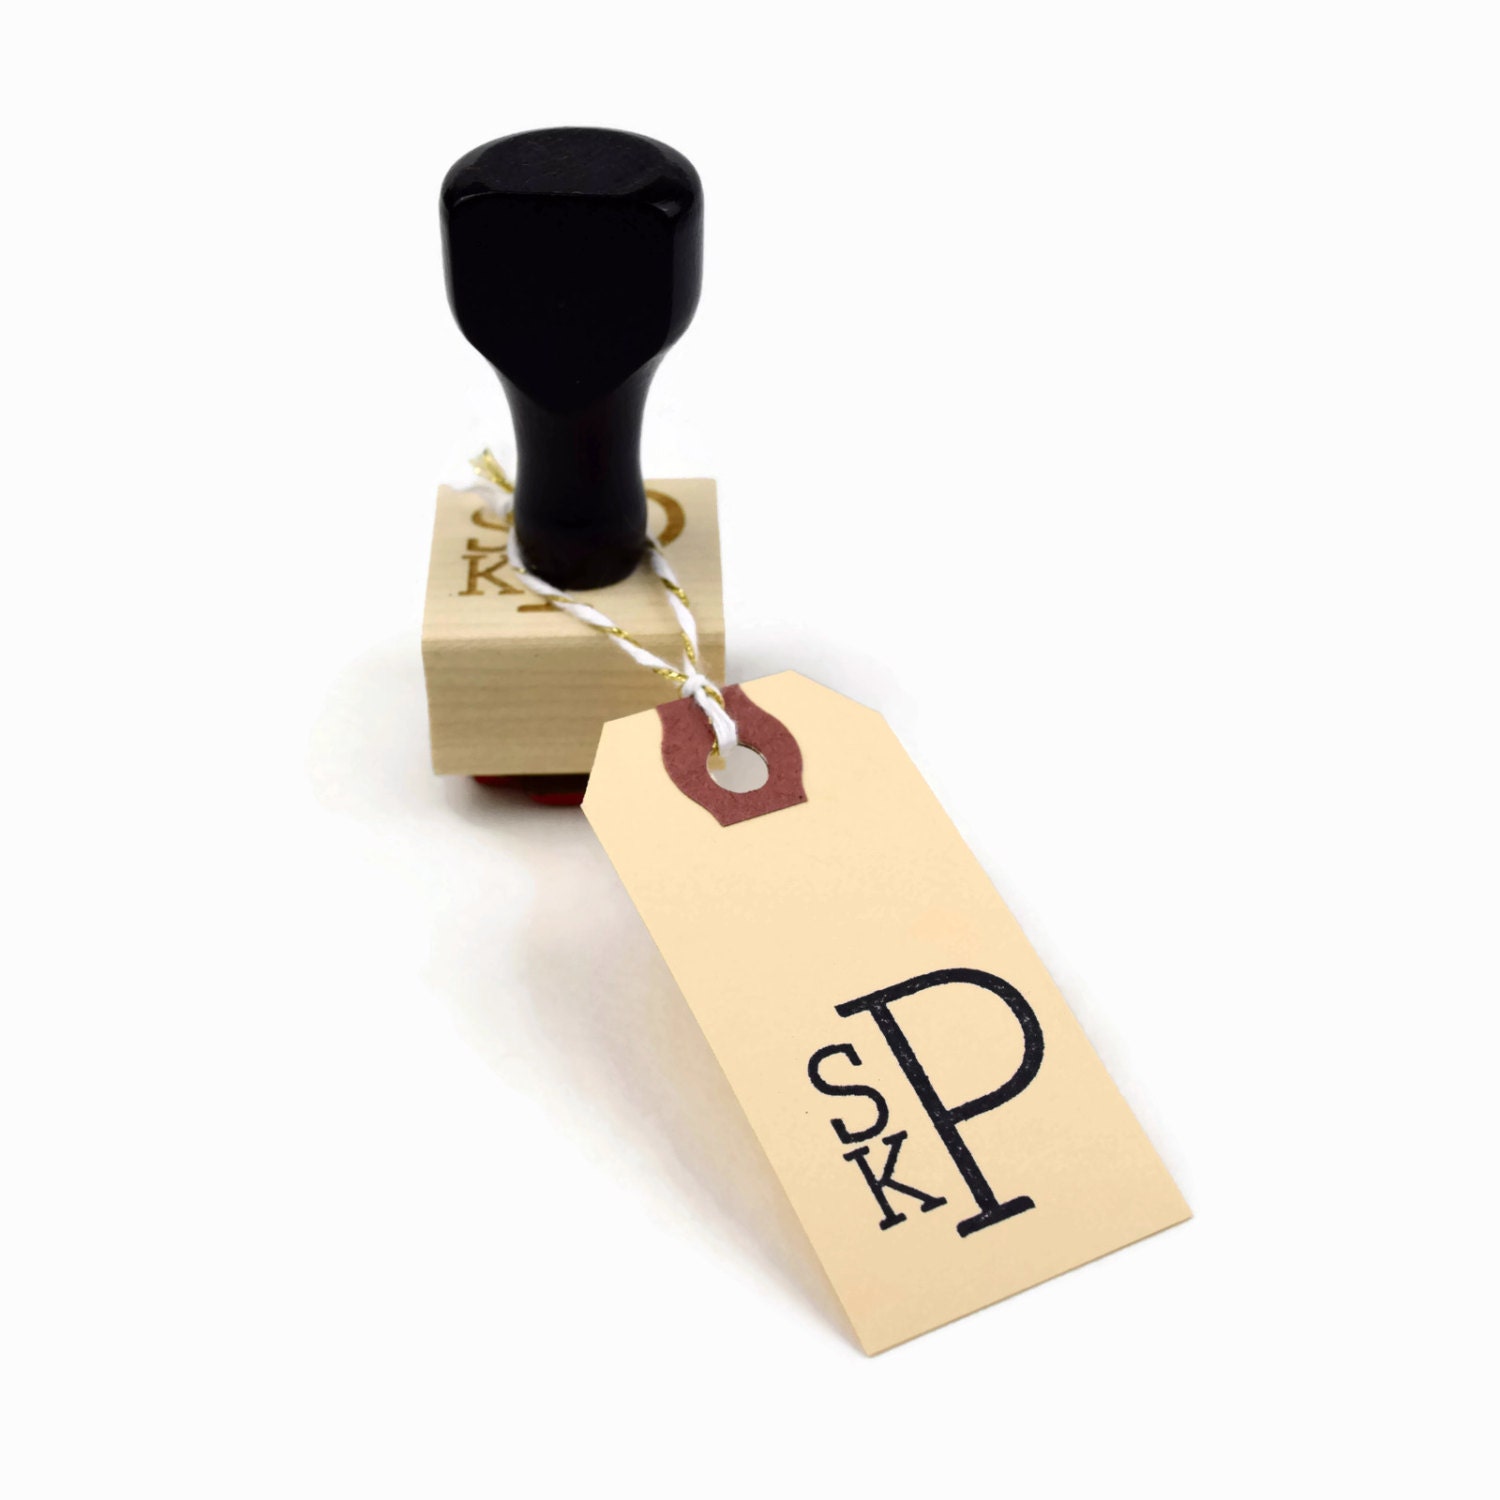 Certified Five-Star Read Stamp, a Book Rubber Stamp for your Reading  Journal designed by Modern Maker Stamps